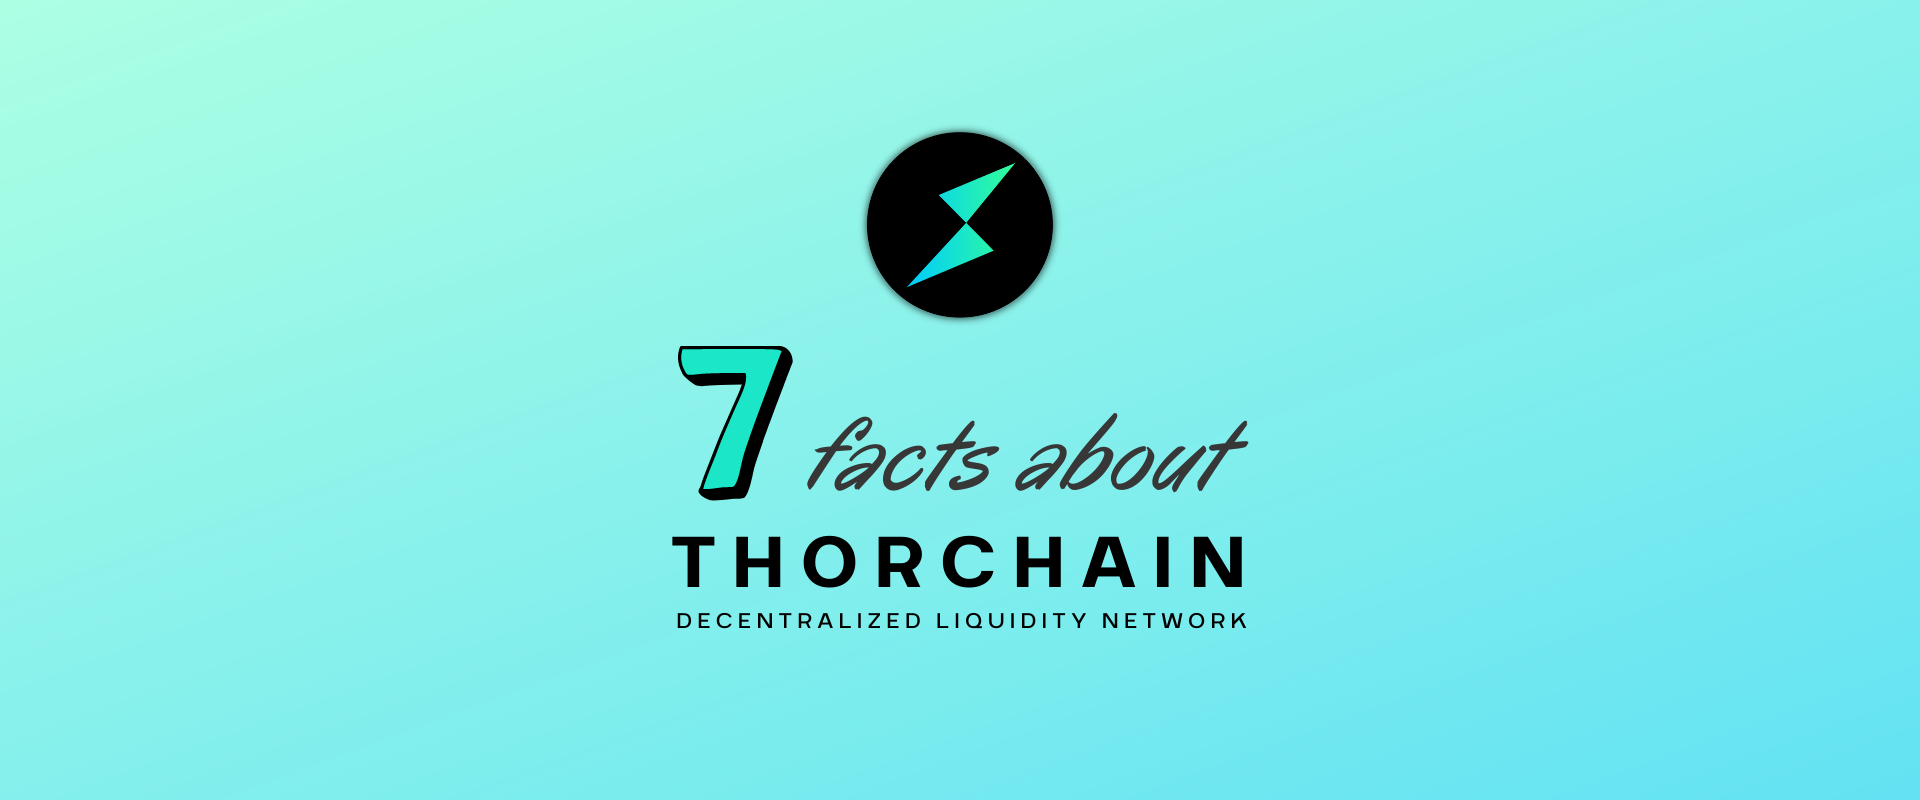 thorchain facts.png